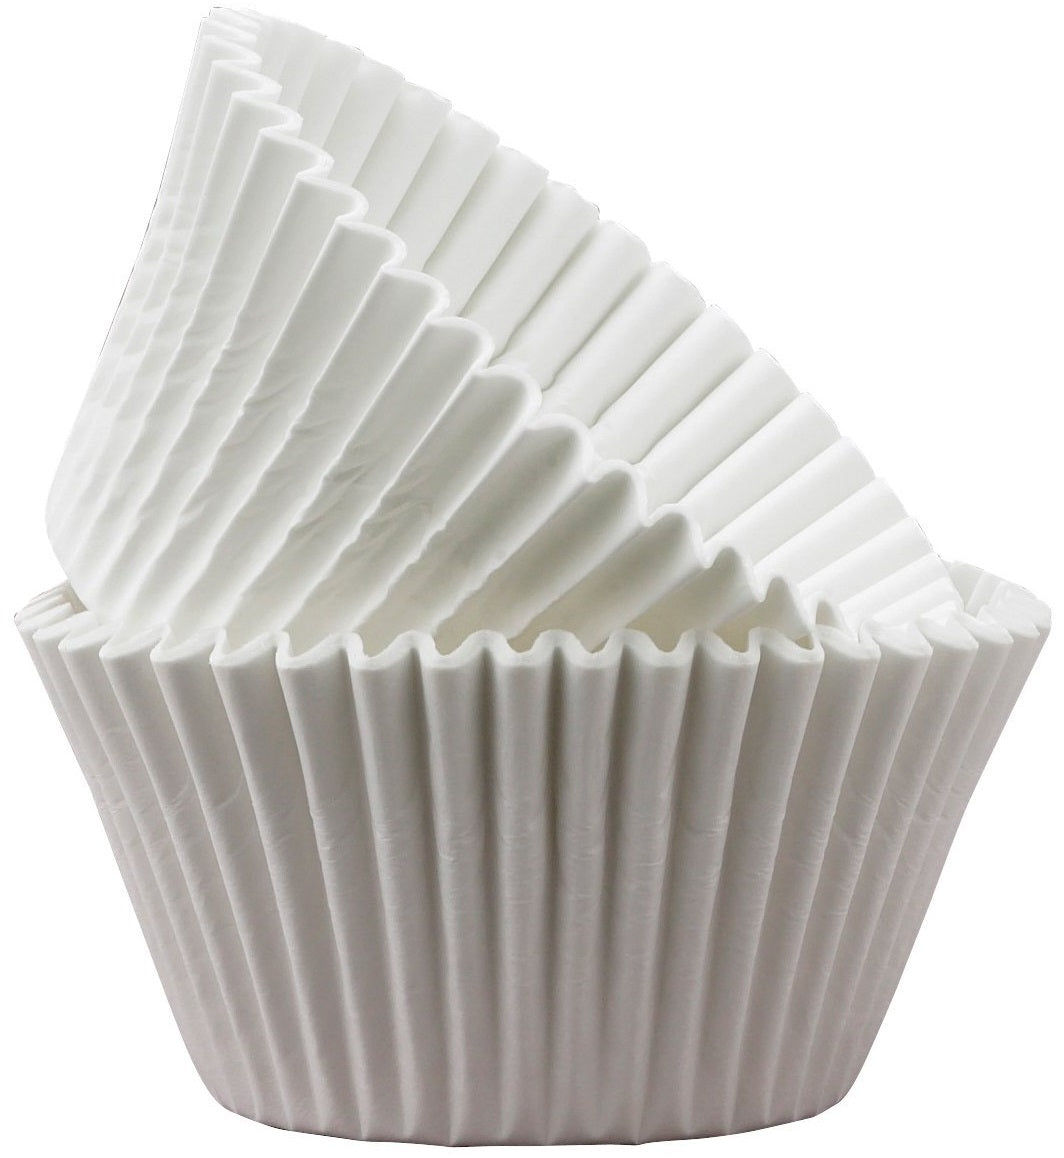 Mrs. Anderson's 1658 Baking Muffin Cups, Texas, 24/Pack